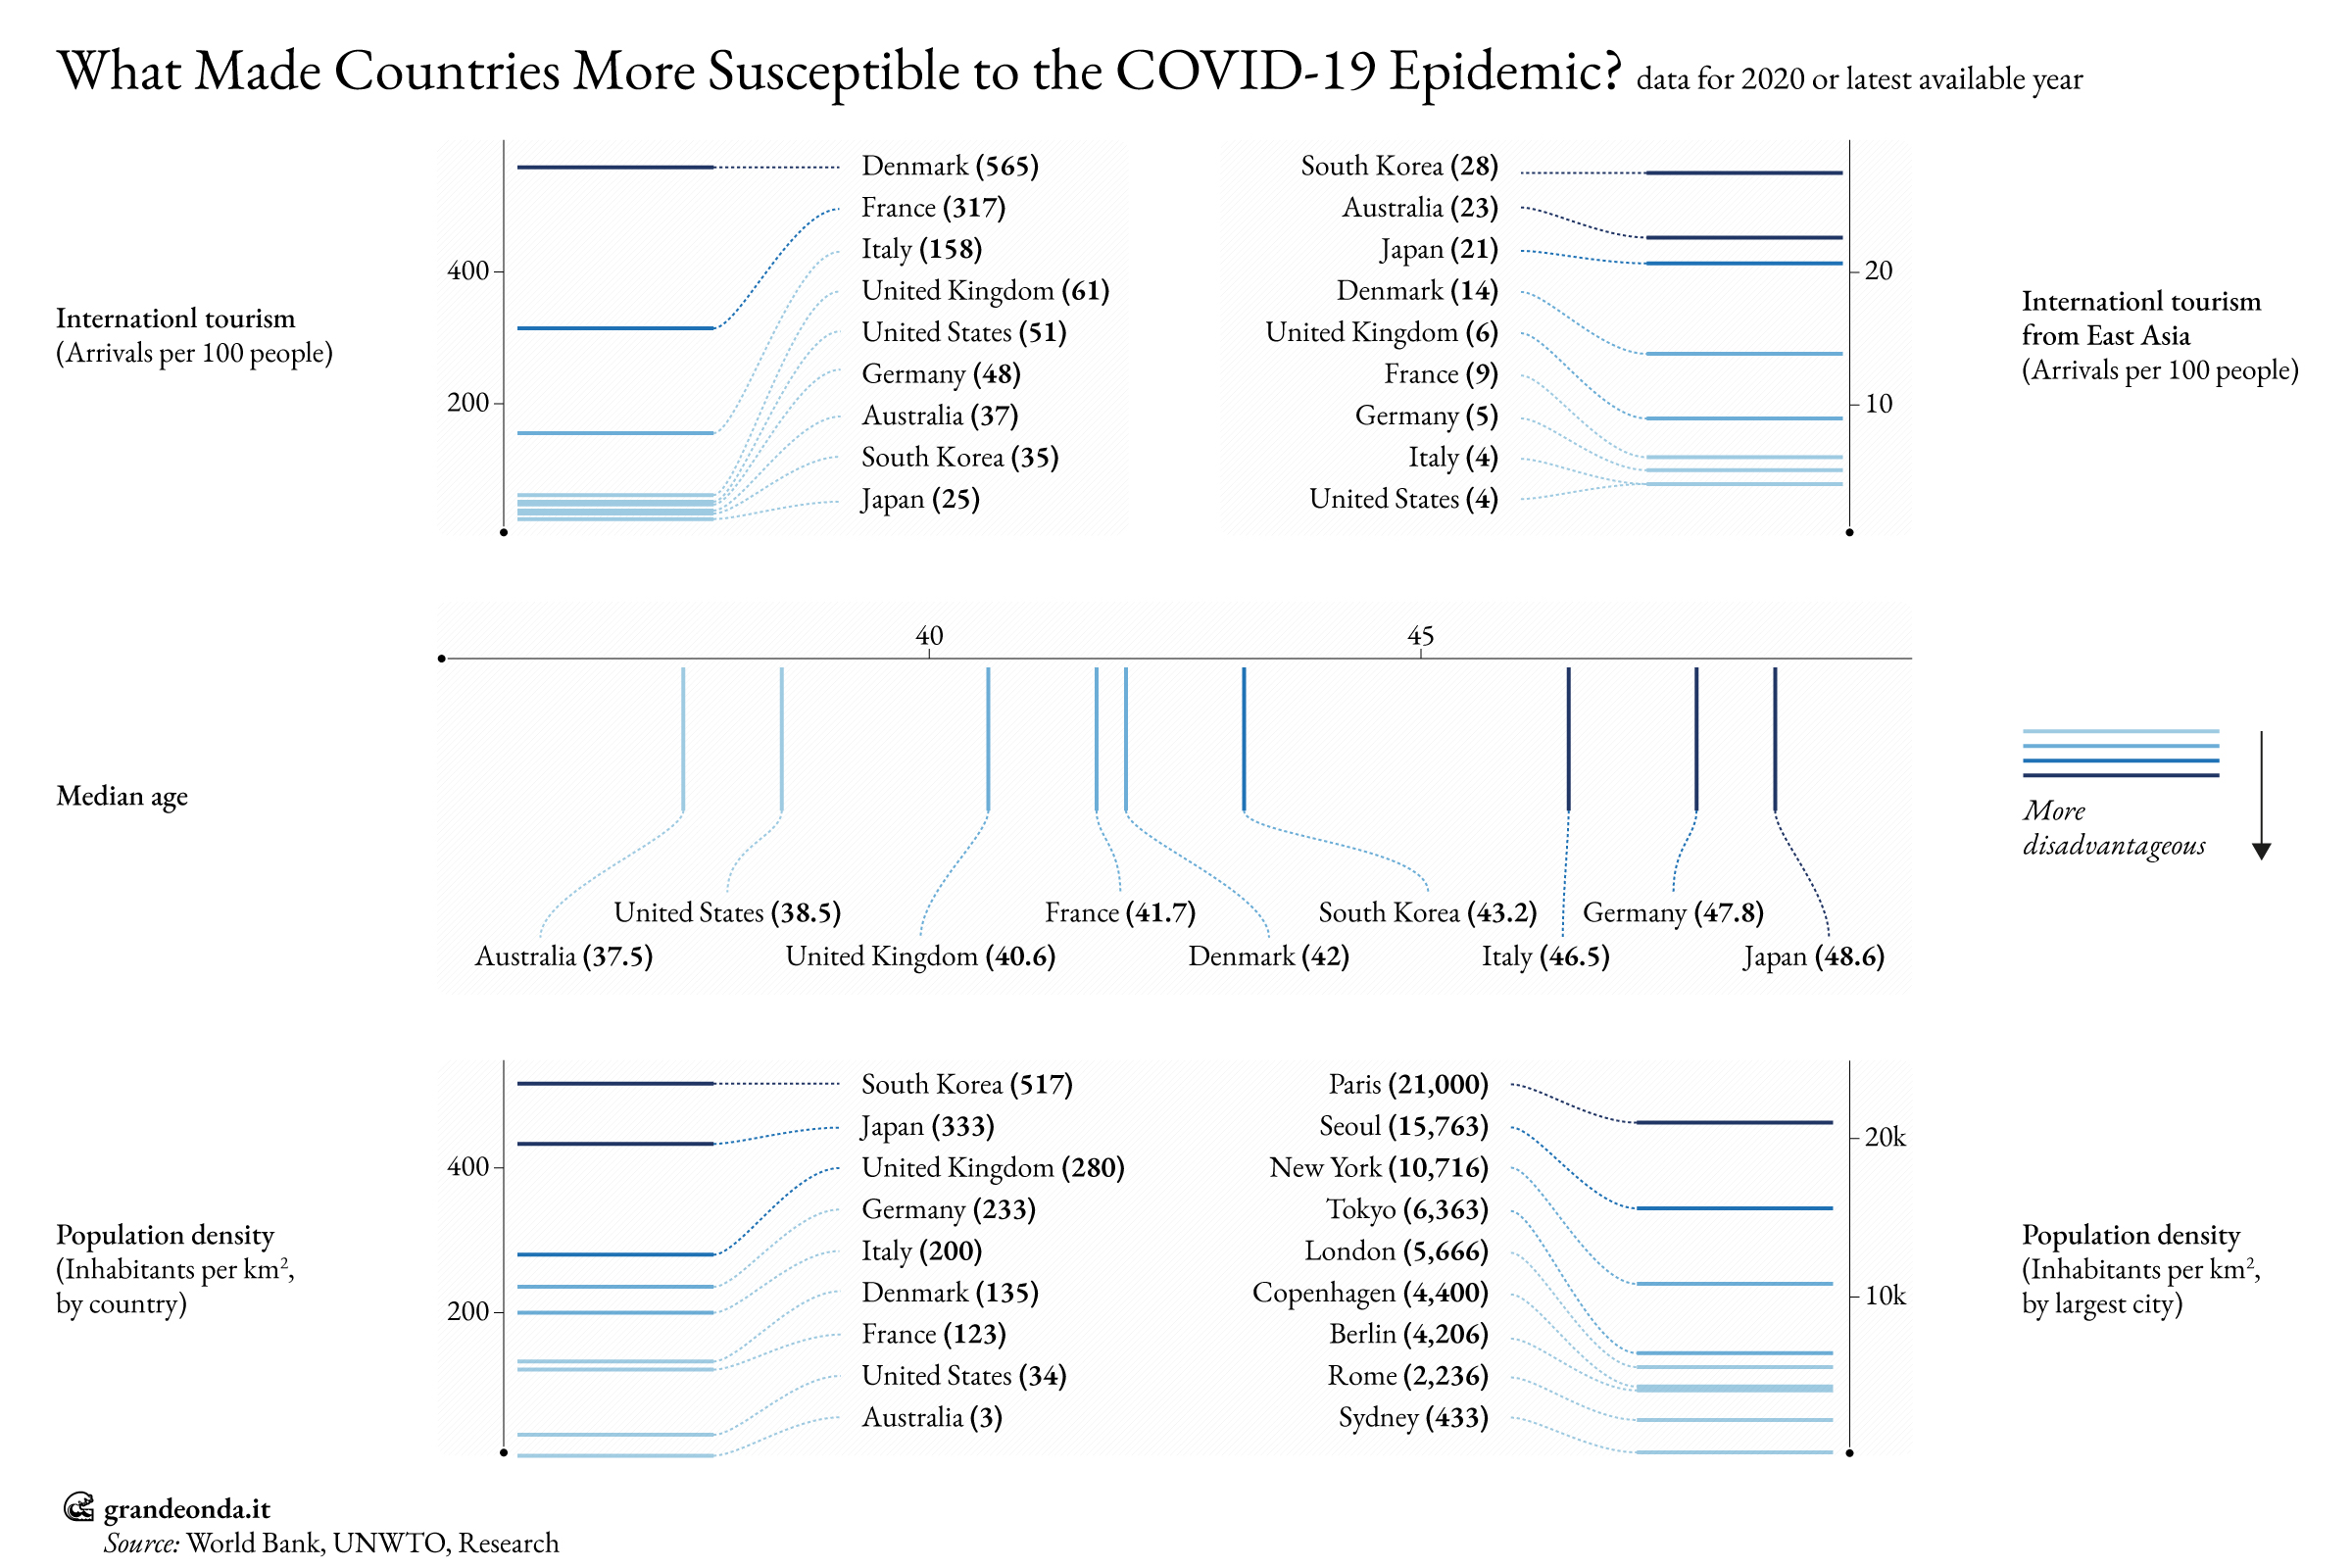 Countries at a disadvantage against COVID-19